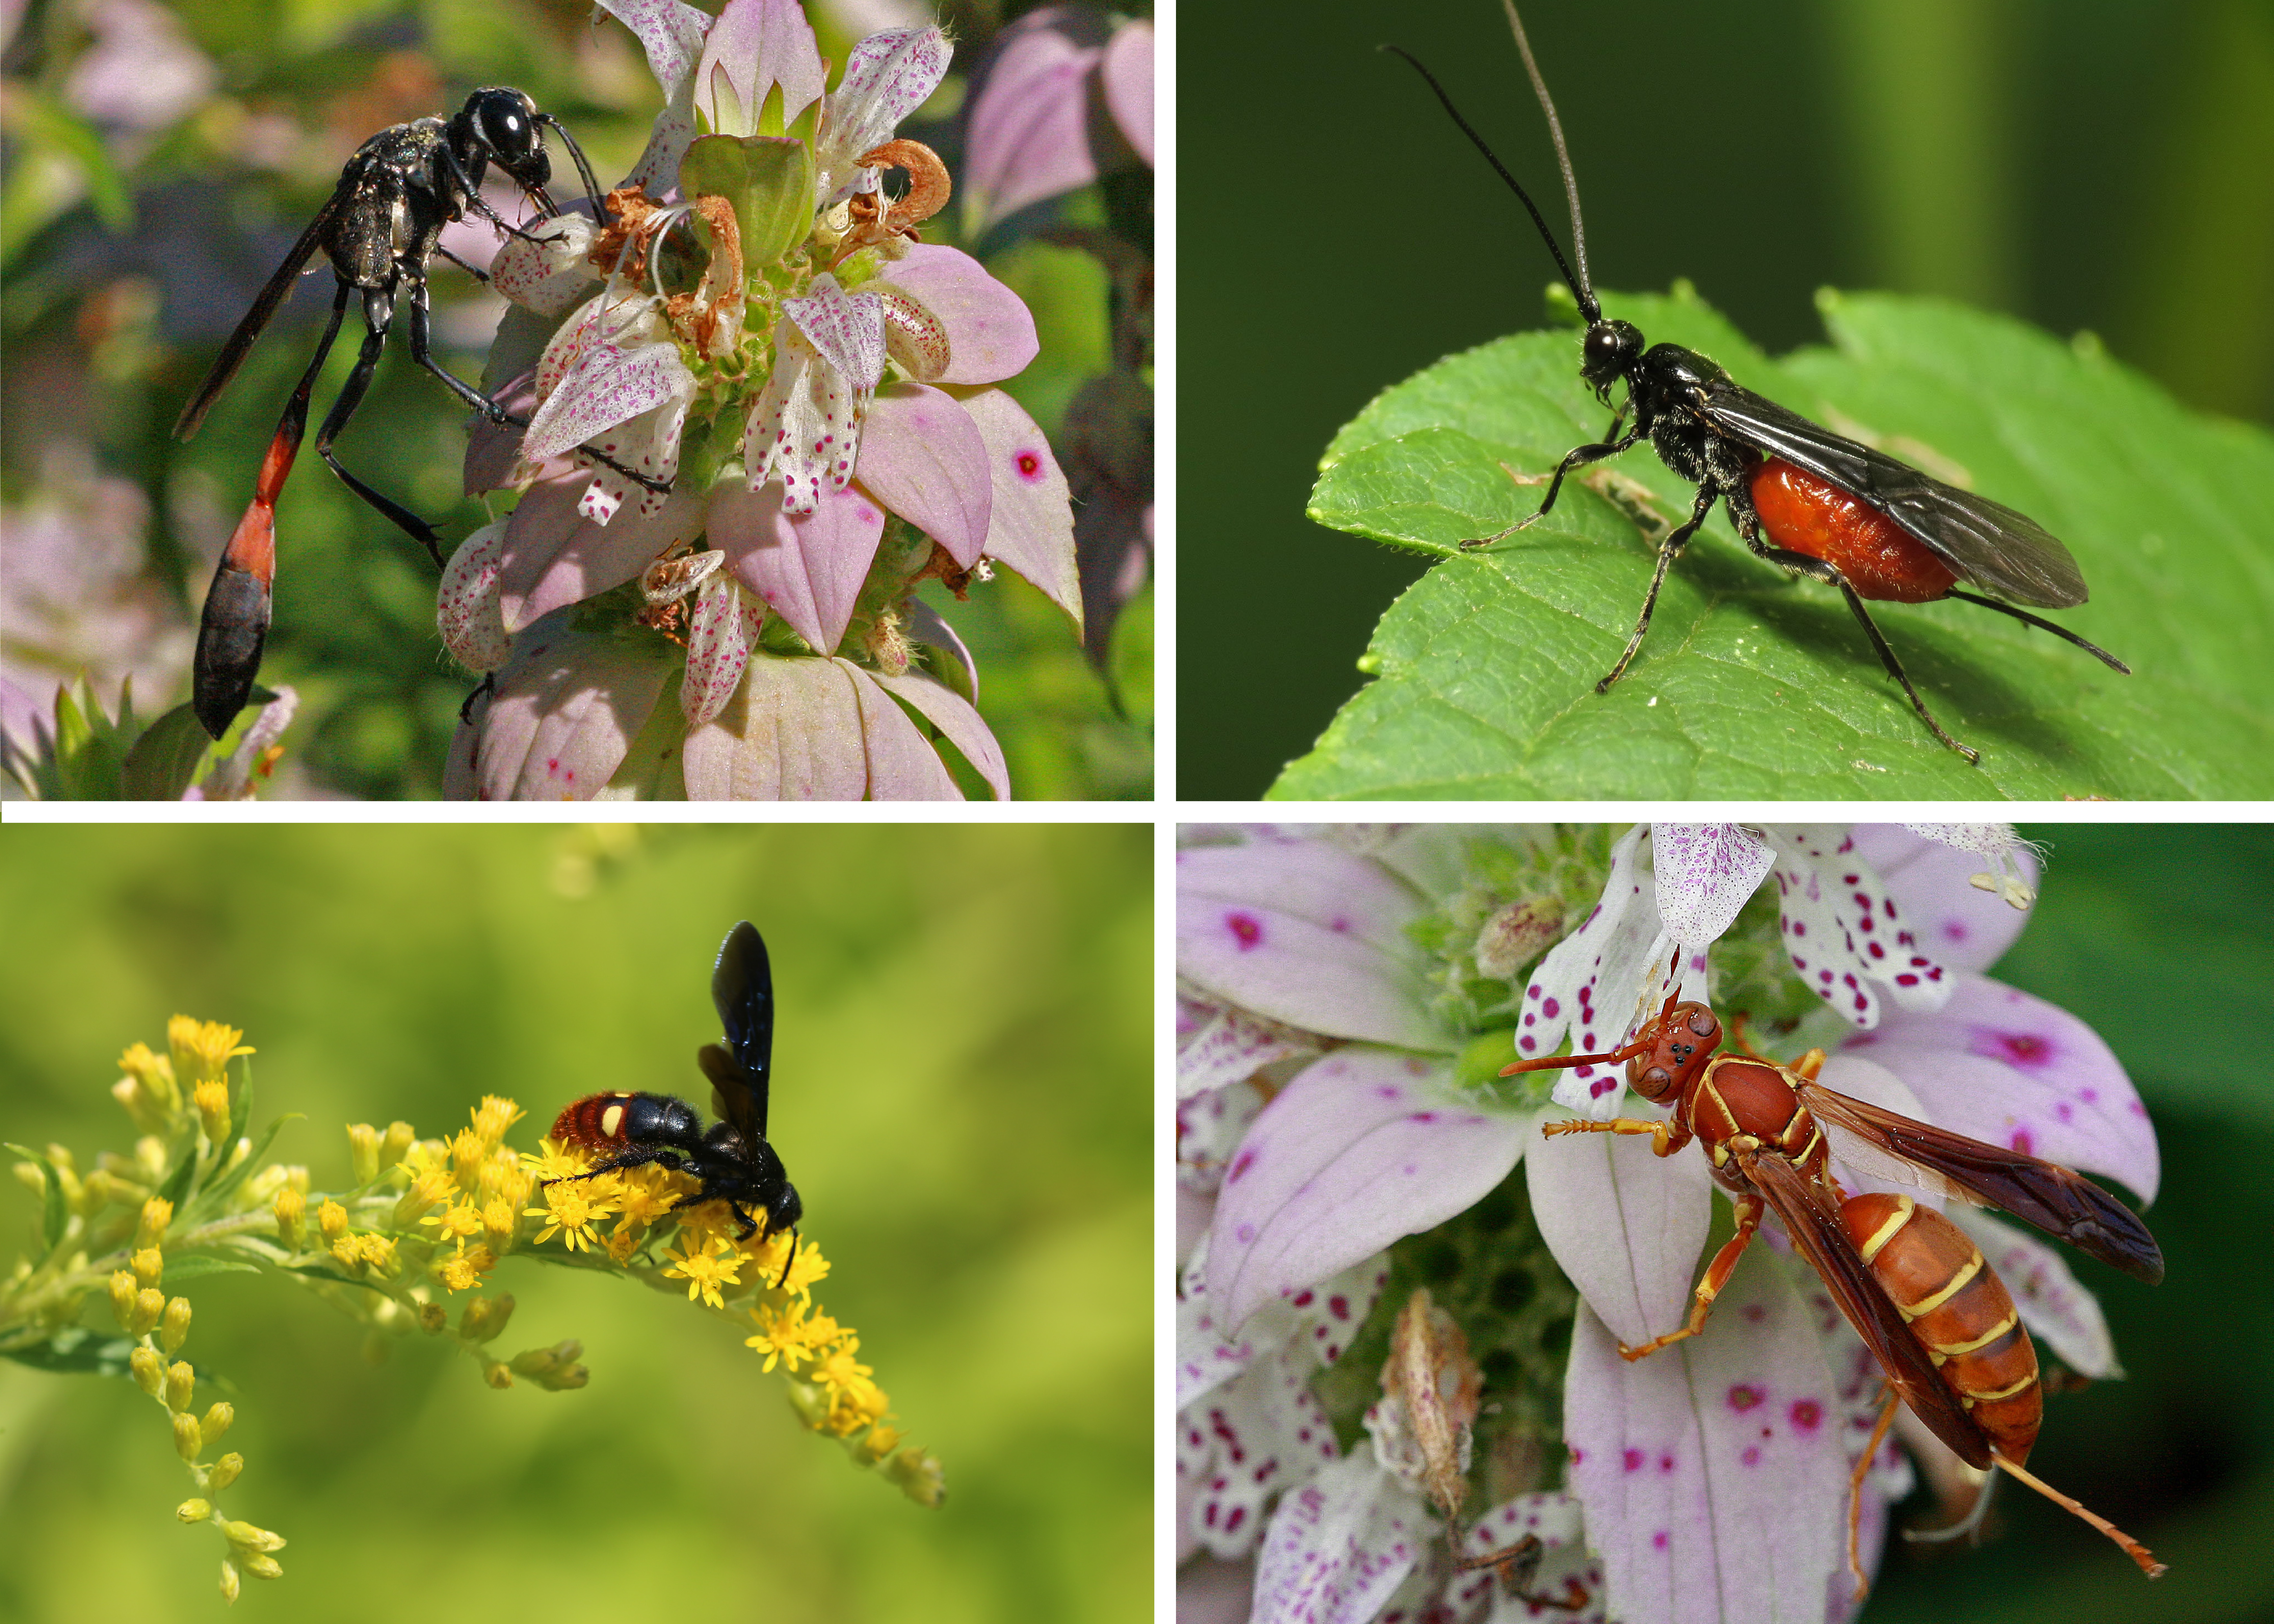 A colorful assortment of wasp photos demonstrates the diversity of species among this category of Hymenopterans.